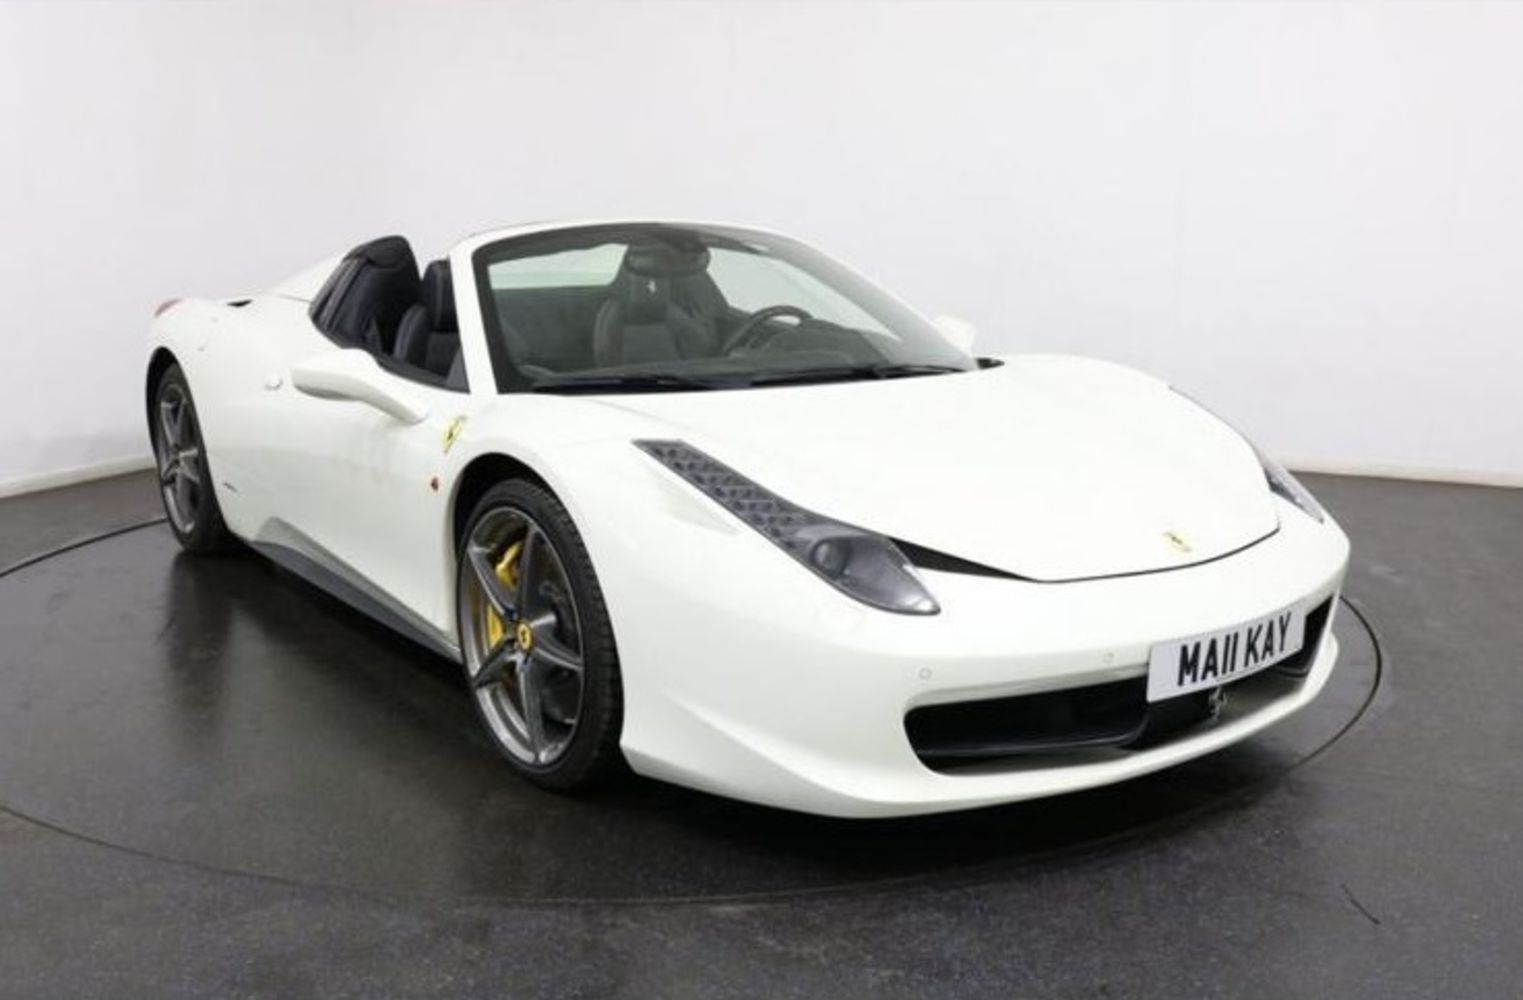 2013 Ferrari 458 spider white 25,000 miles, BRAND NEW NEVER USED, 2020 MOWERS, HIGH VALUE CARS & 4X4'S ENDS SUNDAY FROM 7PM!